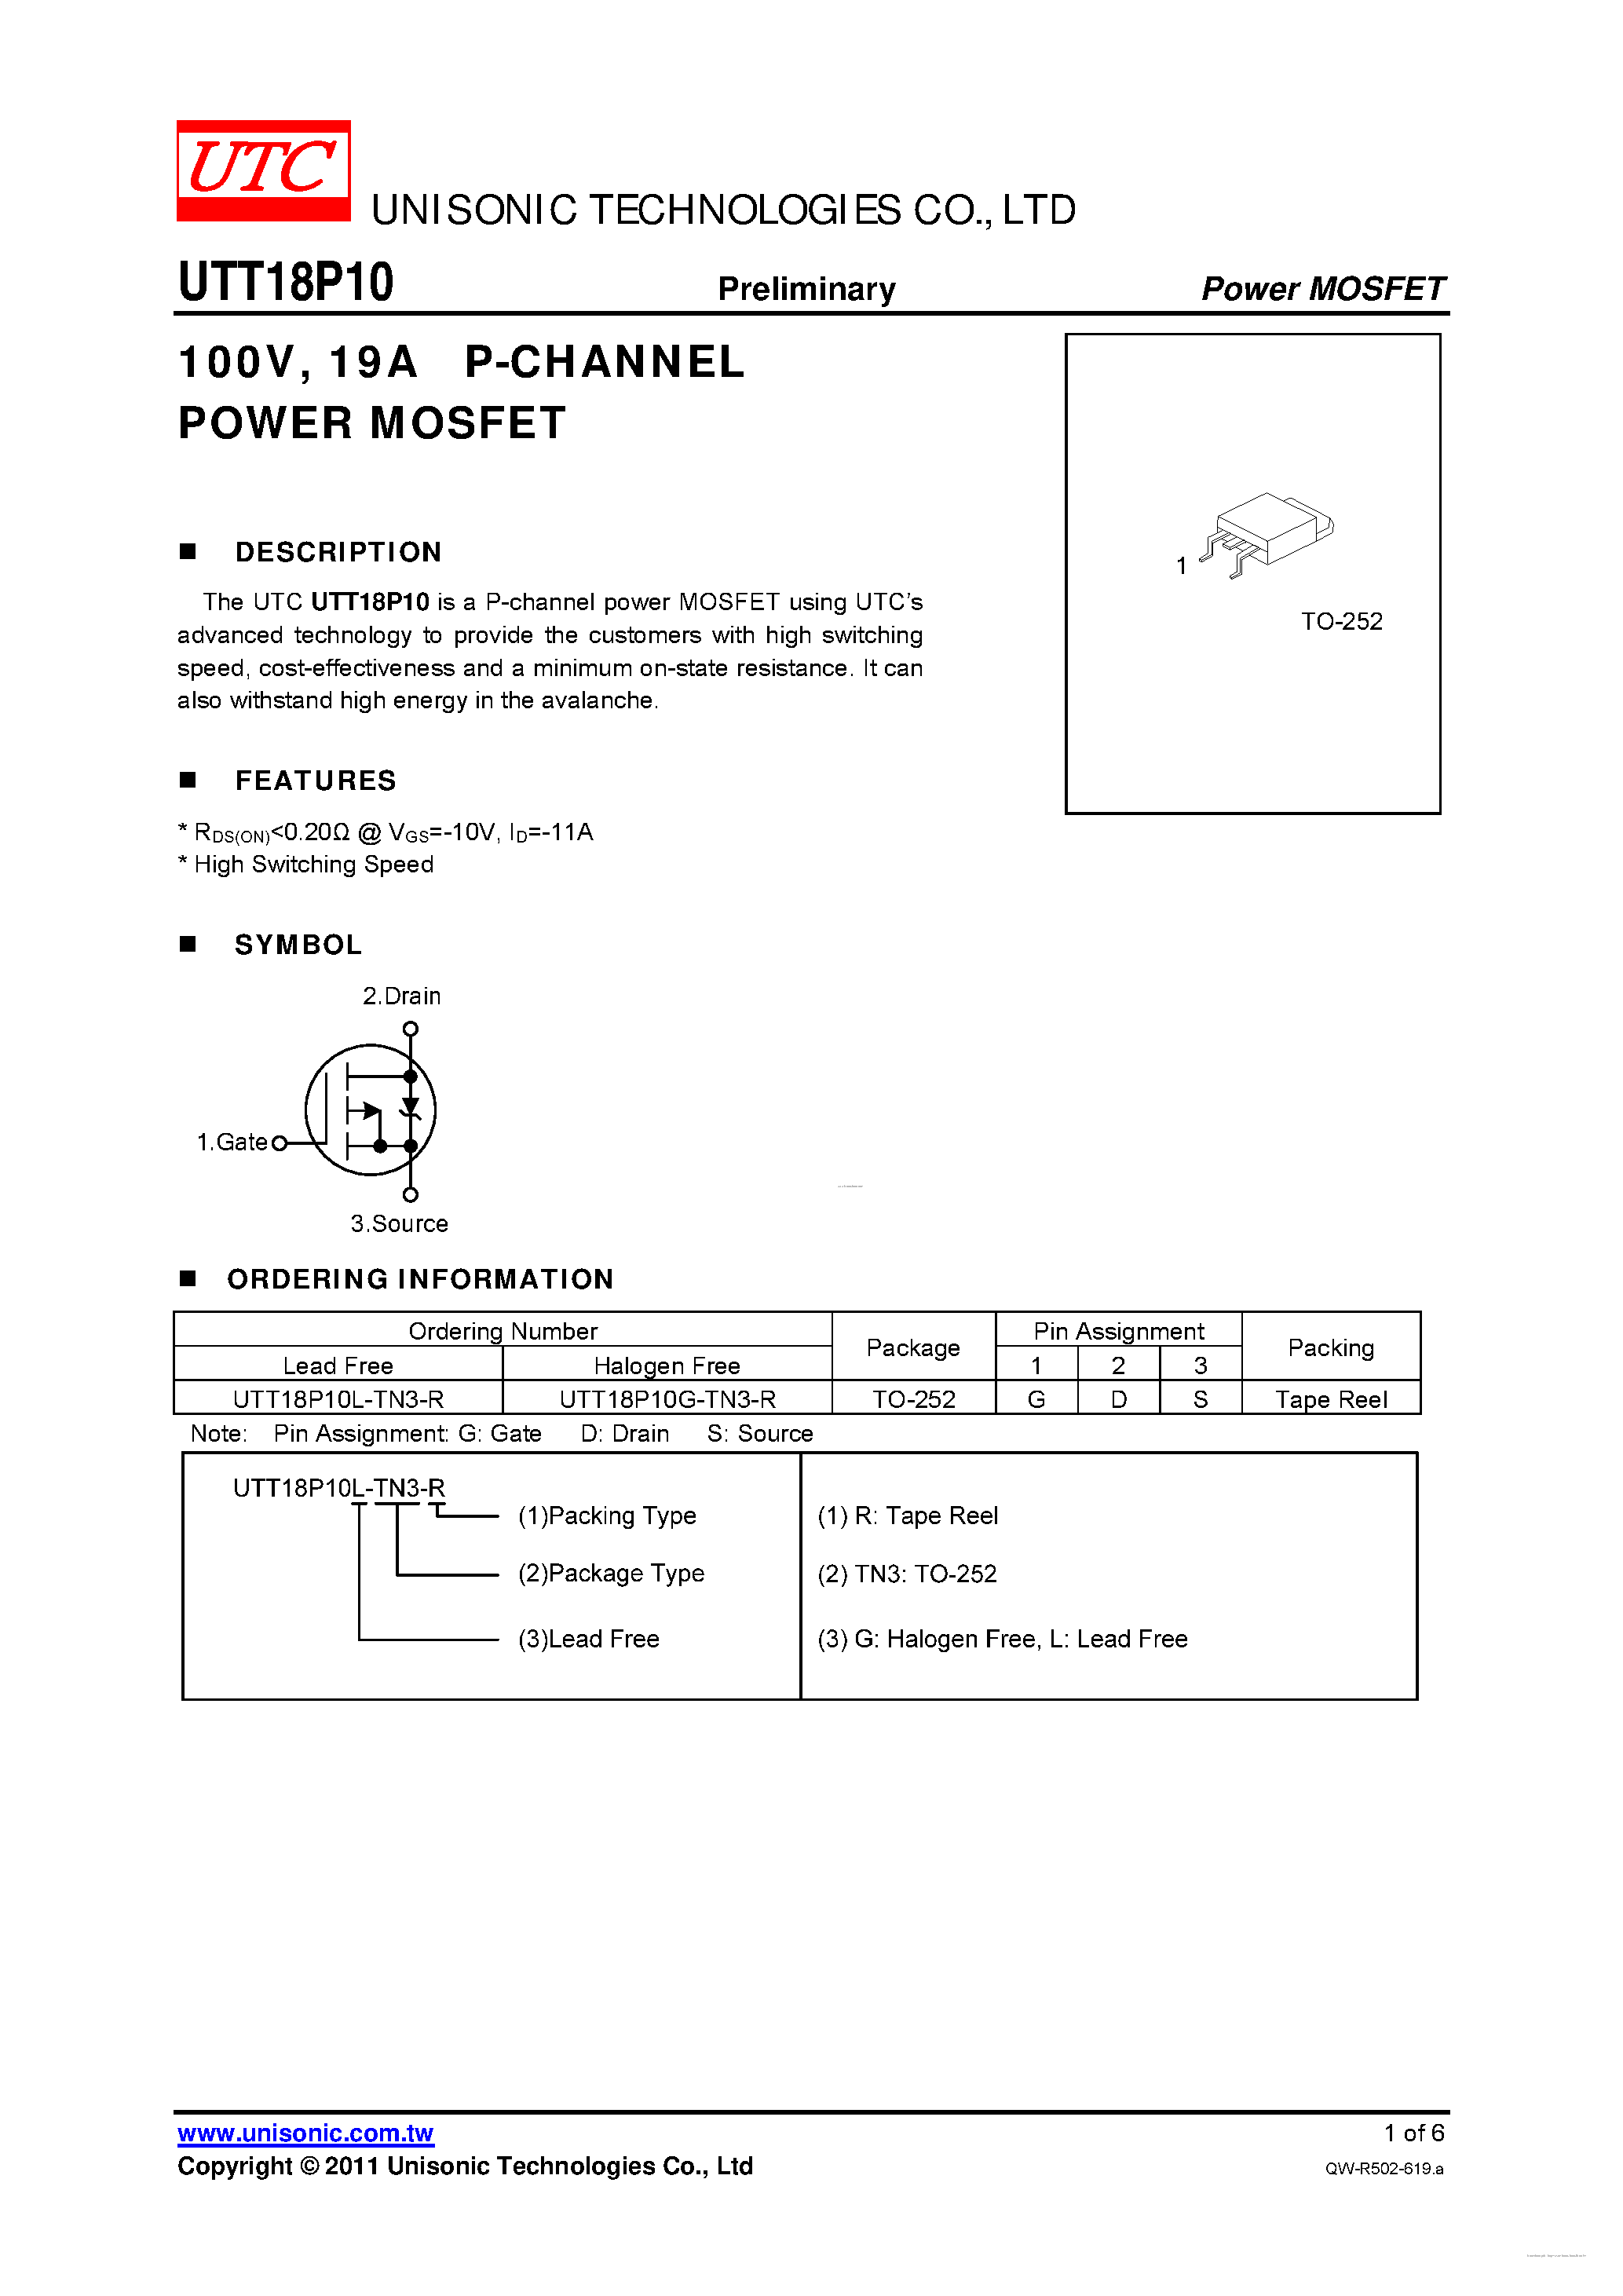 Datasheet UTT18P10 - P-CHANNEL POWER MOSFET page 1